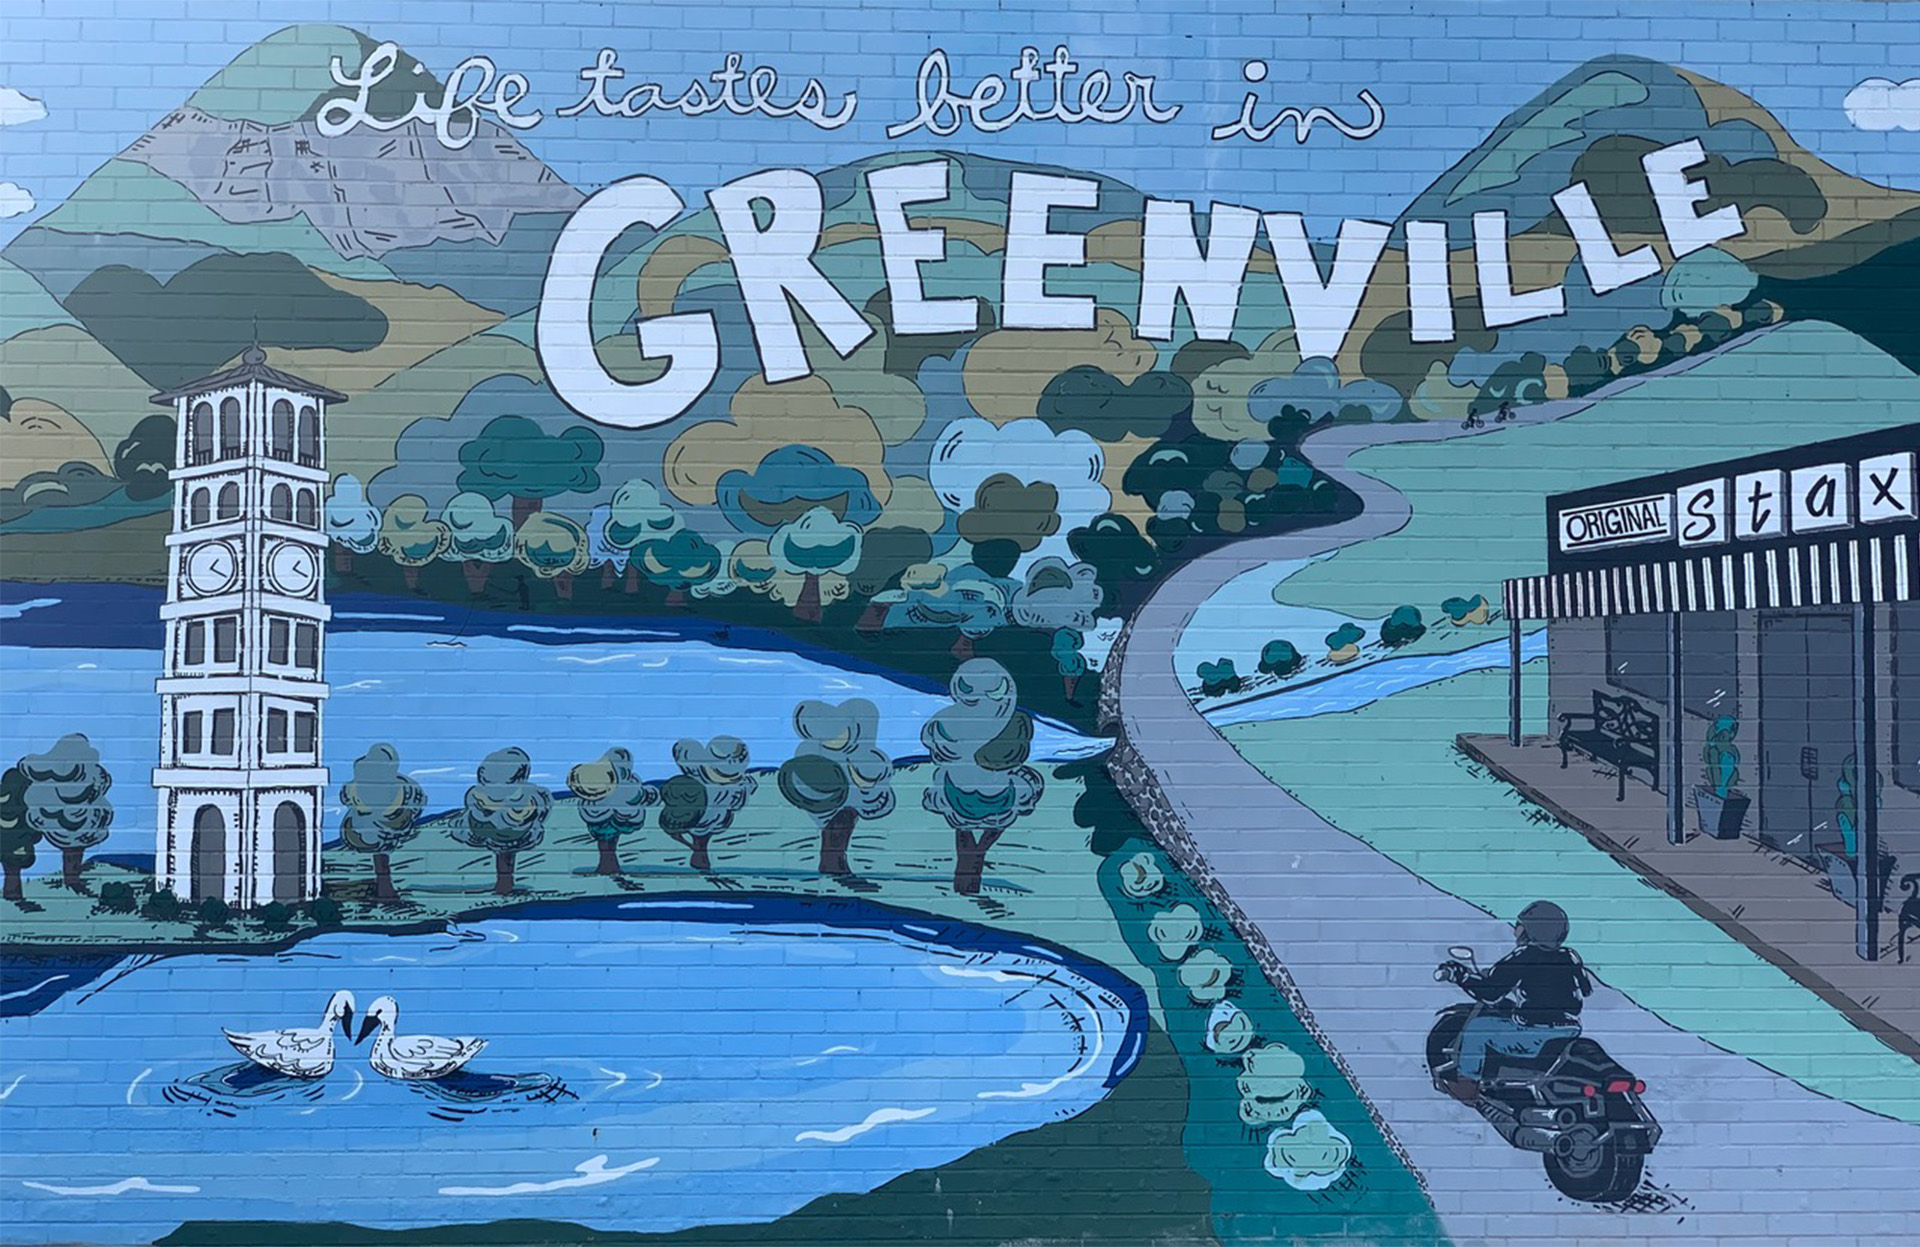 Wall mural of "Life tastes better in Greenville" with hills, a clocktower, a person on a motorcycle, and the Original Stax building